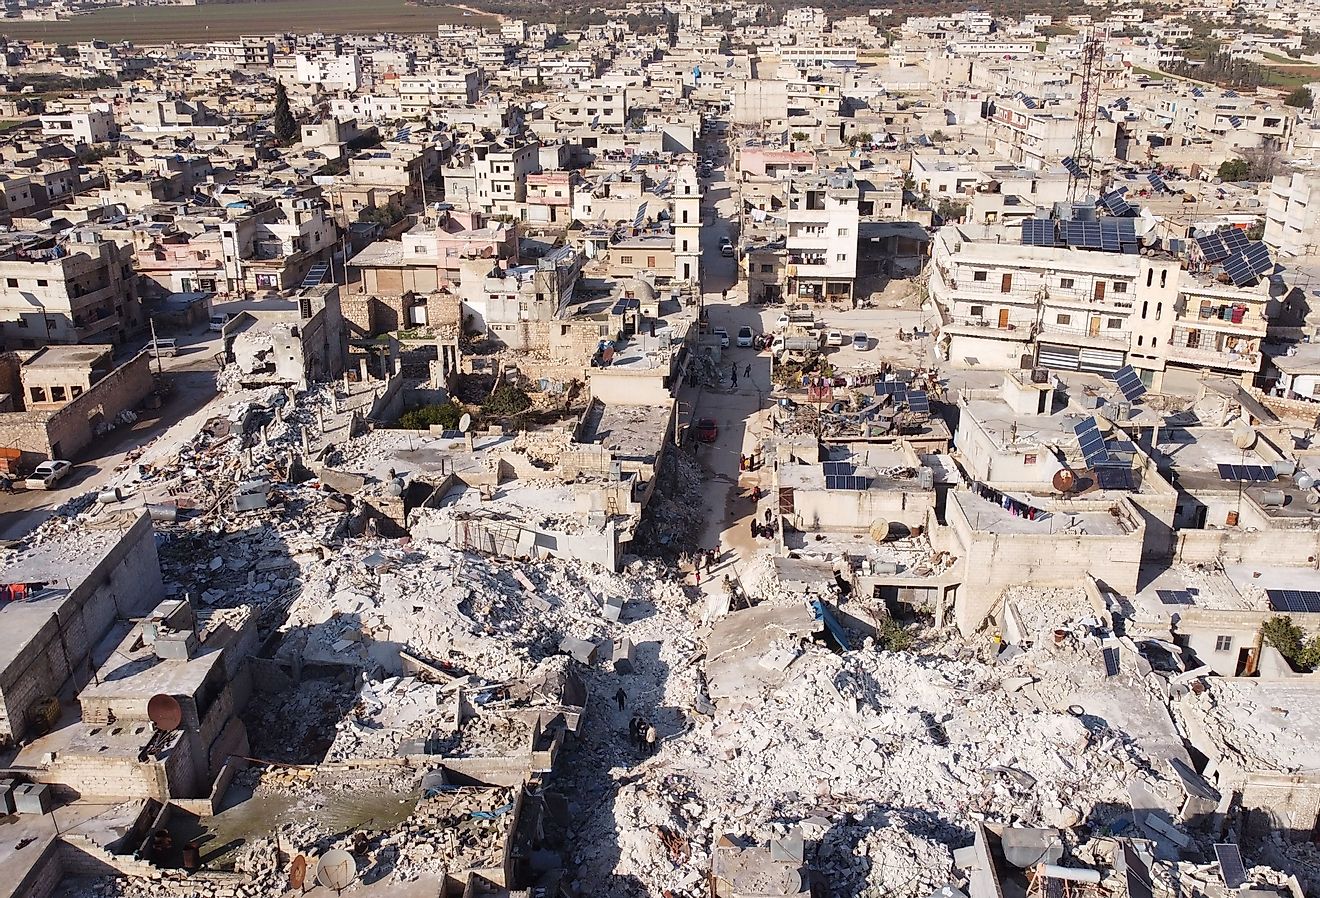 Drone photos show the massive devastation caused by the earthquake that struck Syria and Turkey, leaving tens of thousands dead and injured. 